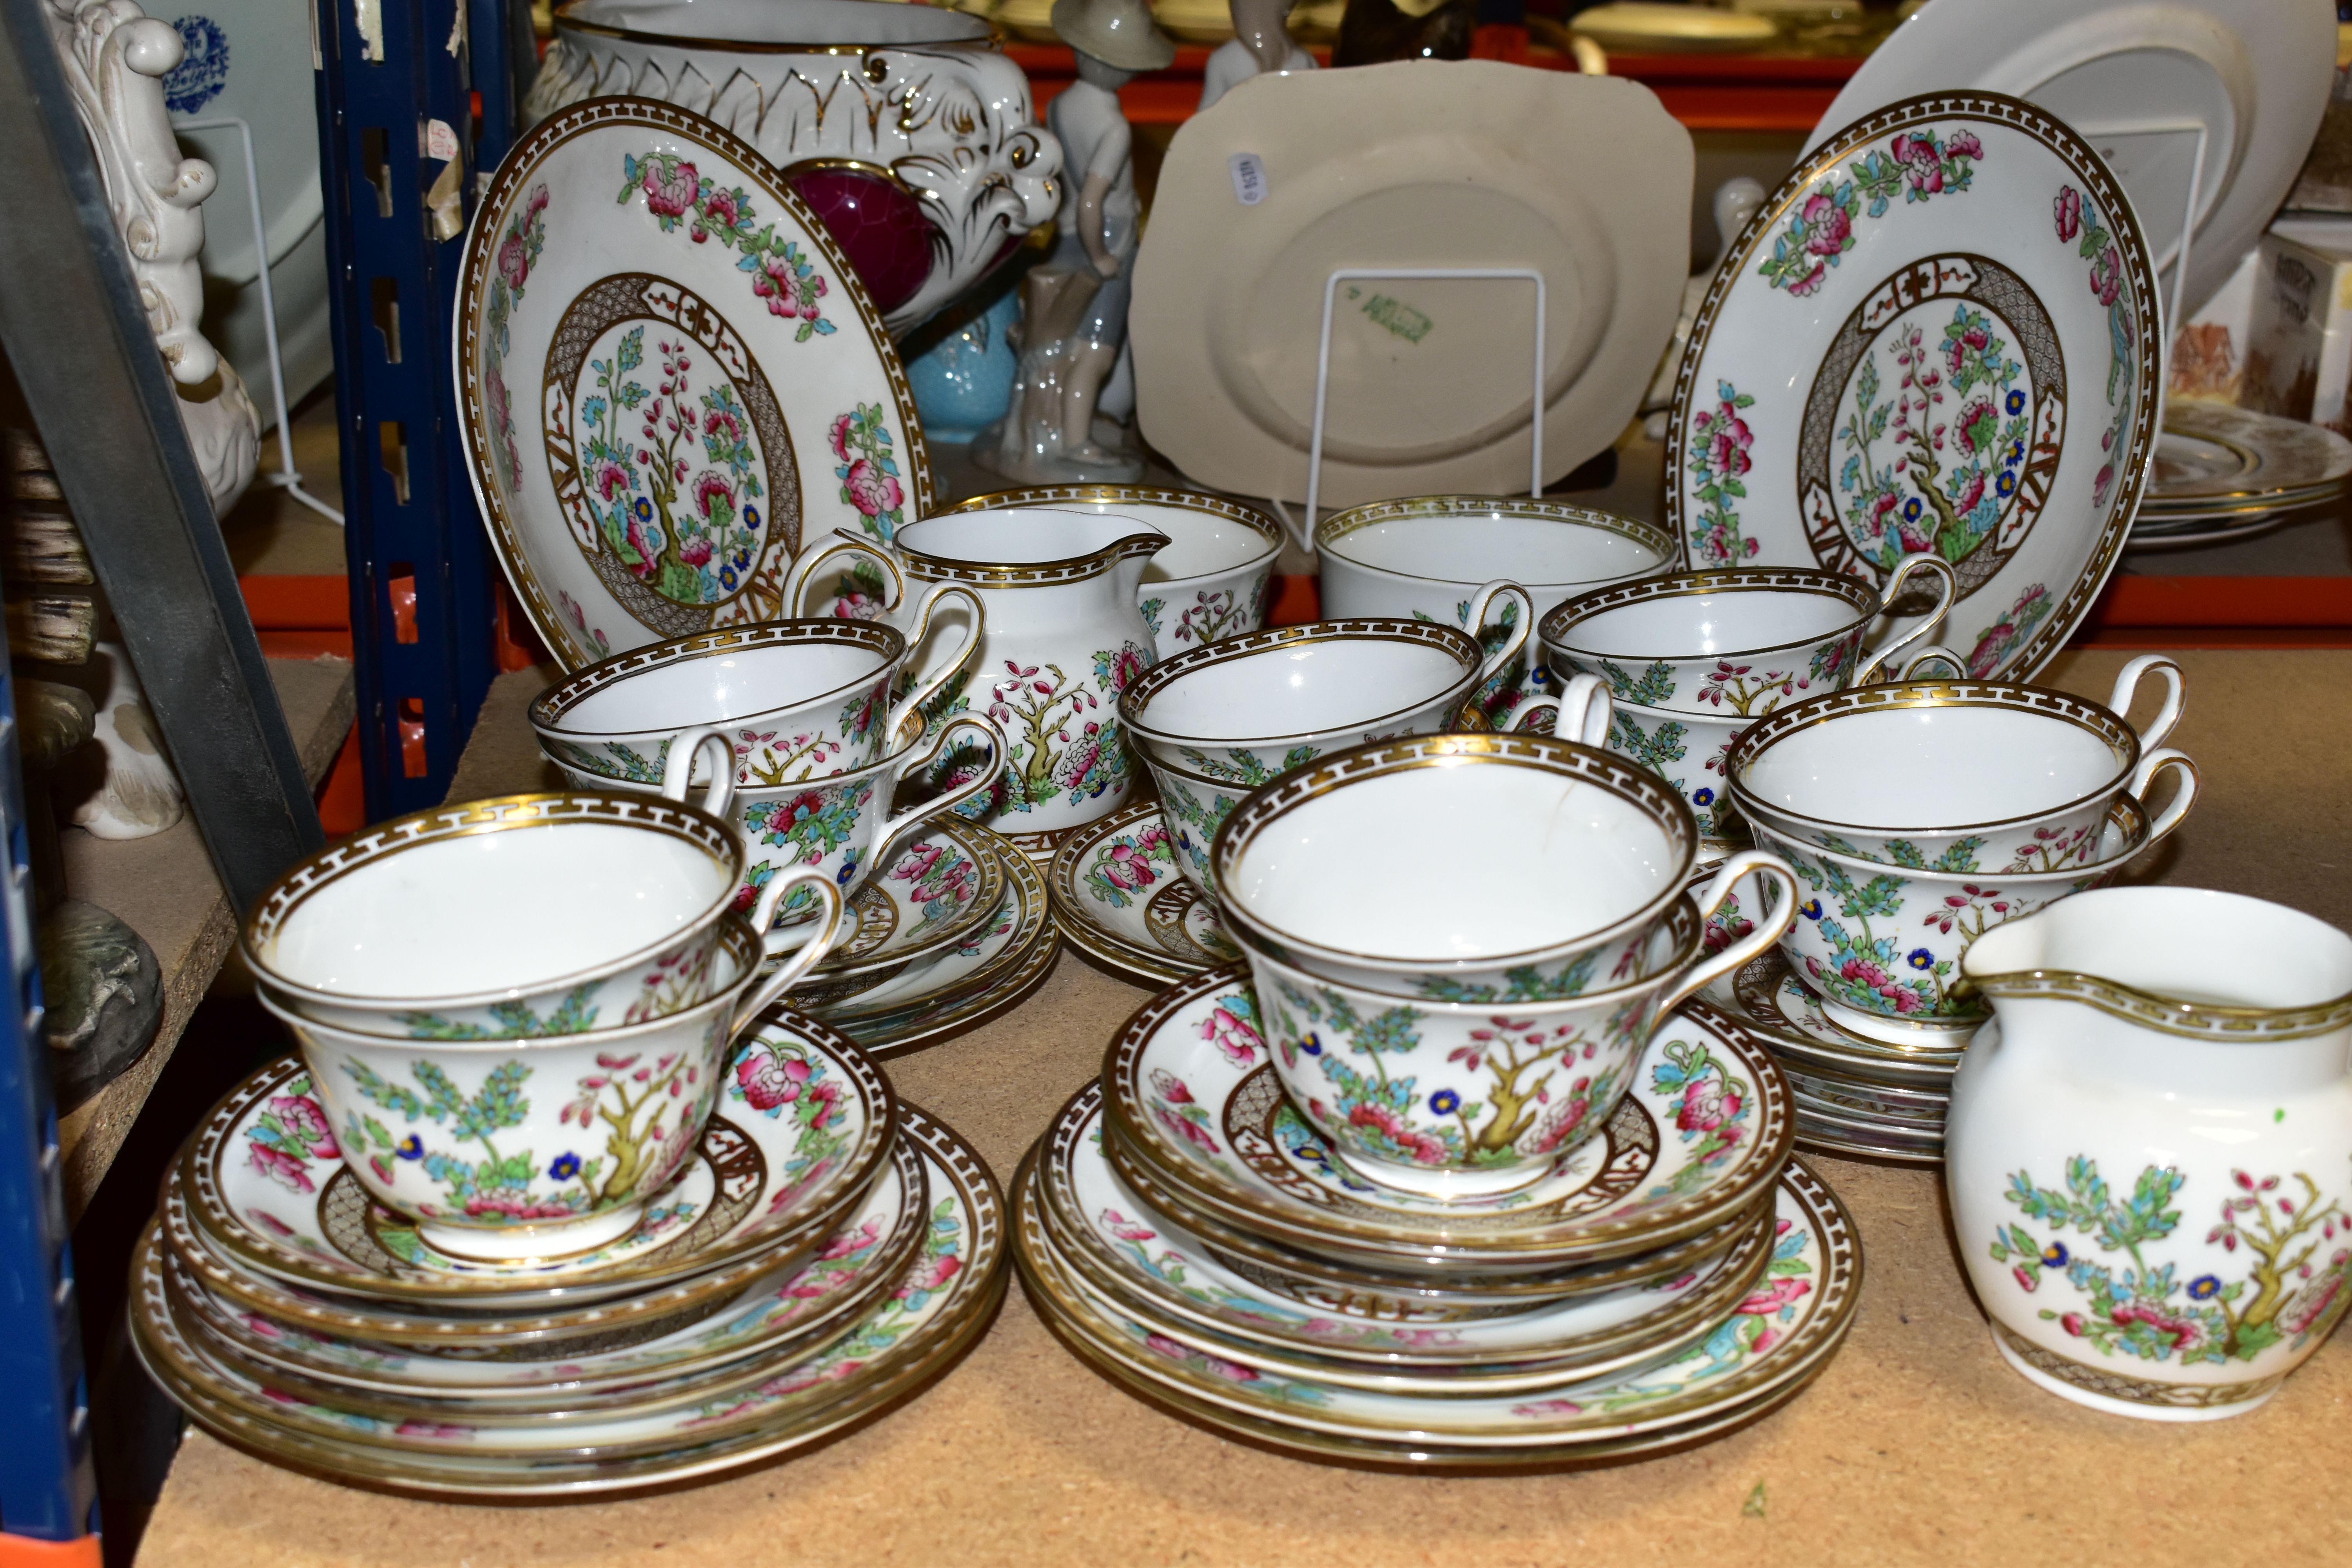 AN ANCHOR CHINA 'INDIAN TREE' PATTERN TEA SET, comprising two milk jugs (one has a green paint